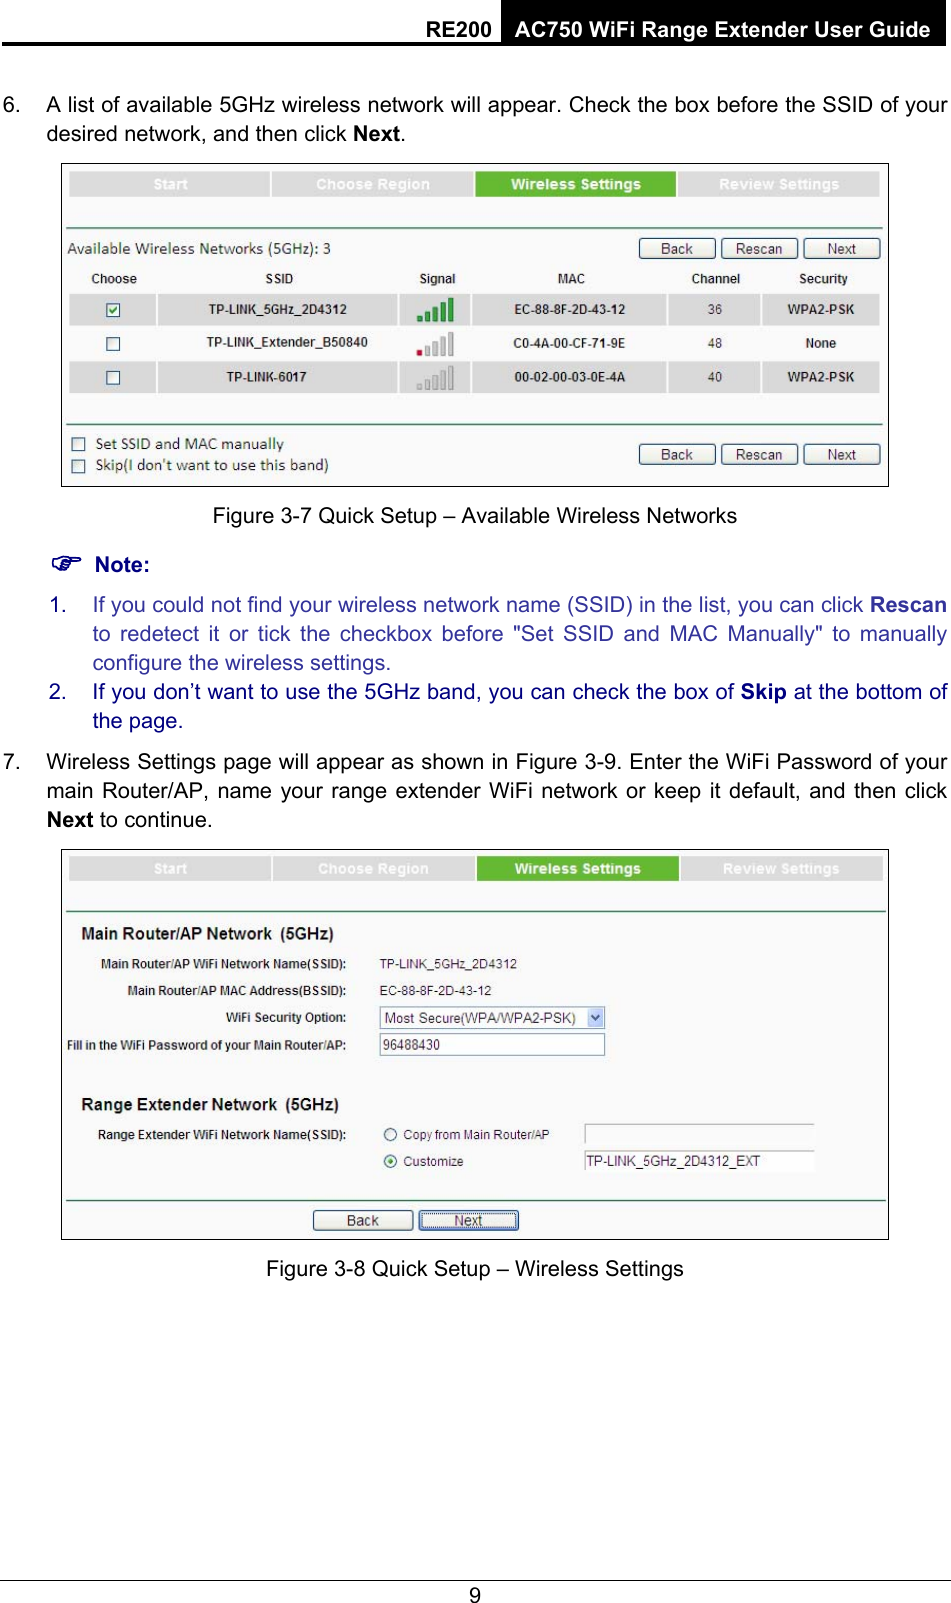 RE200 AC750 WiFi Range Extender User Guide 7.  A list of available 5GHz wireless network will appear. Check the box before the SSID of your desired network, and then click Next.   Figure 3-8 Quick Setup – Available Wireless Networks ) Note: 1.  If you could not find your wireless network name (SSID) in the list, you can click Rescan to redetect it or tick the checkbox before &quot;Set SSID and MAC Manually&quot; to manually configure the wireless settings. 2.  If you don’t want to use the 5GHz band, you can check the box of Skip at the bottom of the page. 8.  Wireless Settings page will appear as shown in Figure 3-9. Enter the WiFi Password of your main Router/AP, name your range extender WiFi network or keep it default, and then click Next to continue.  Figure 3-9 Quick Setup – Wireless Settings 9 6.Figure 3-7 Quick Setup – Available Wireless Networks 7.Figure 3-8 Quick Setup – Wireless Settings 